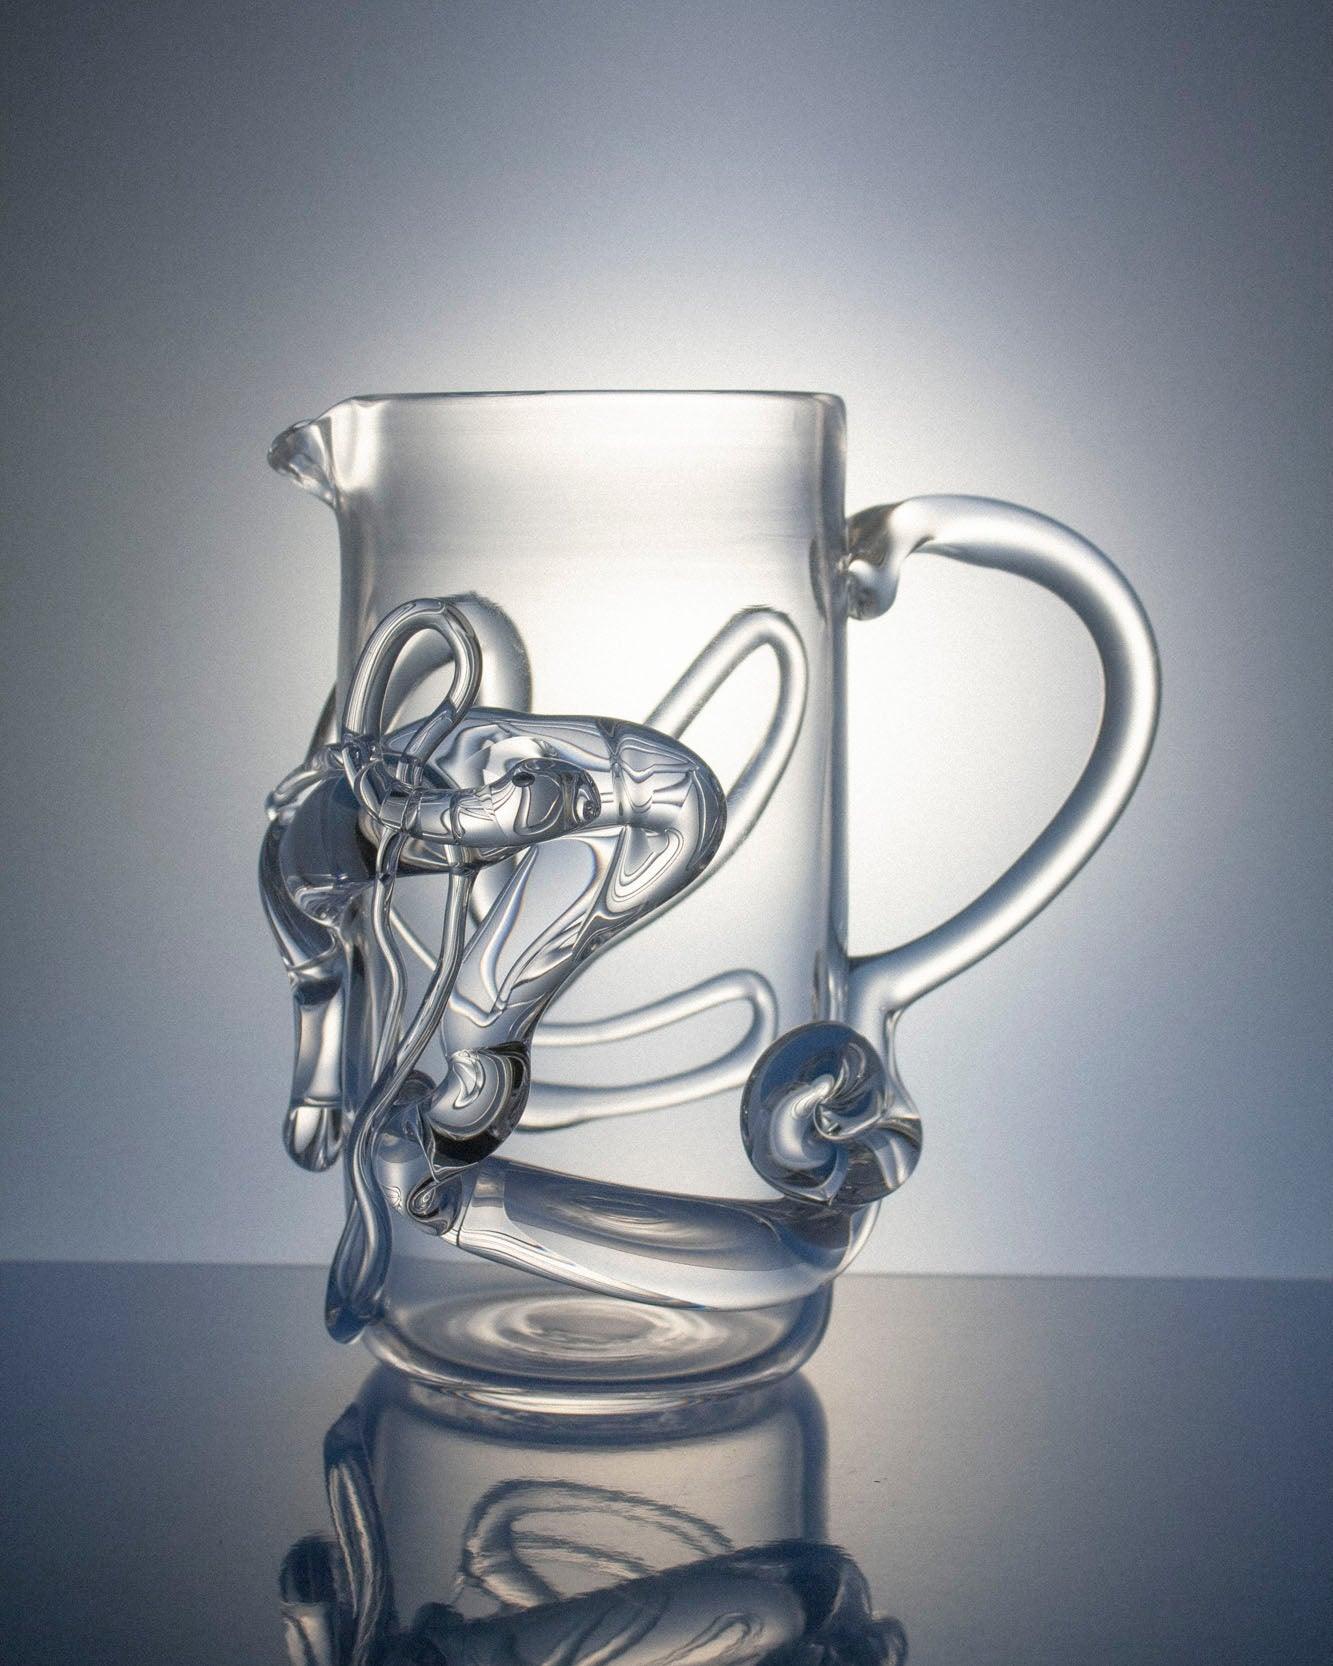 Glass pitcher with melted glass details with handle on right side on light focus background